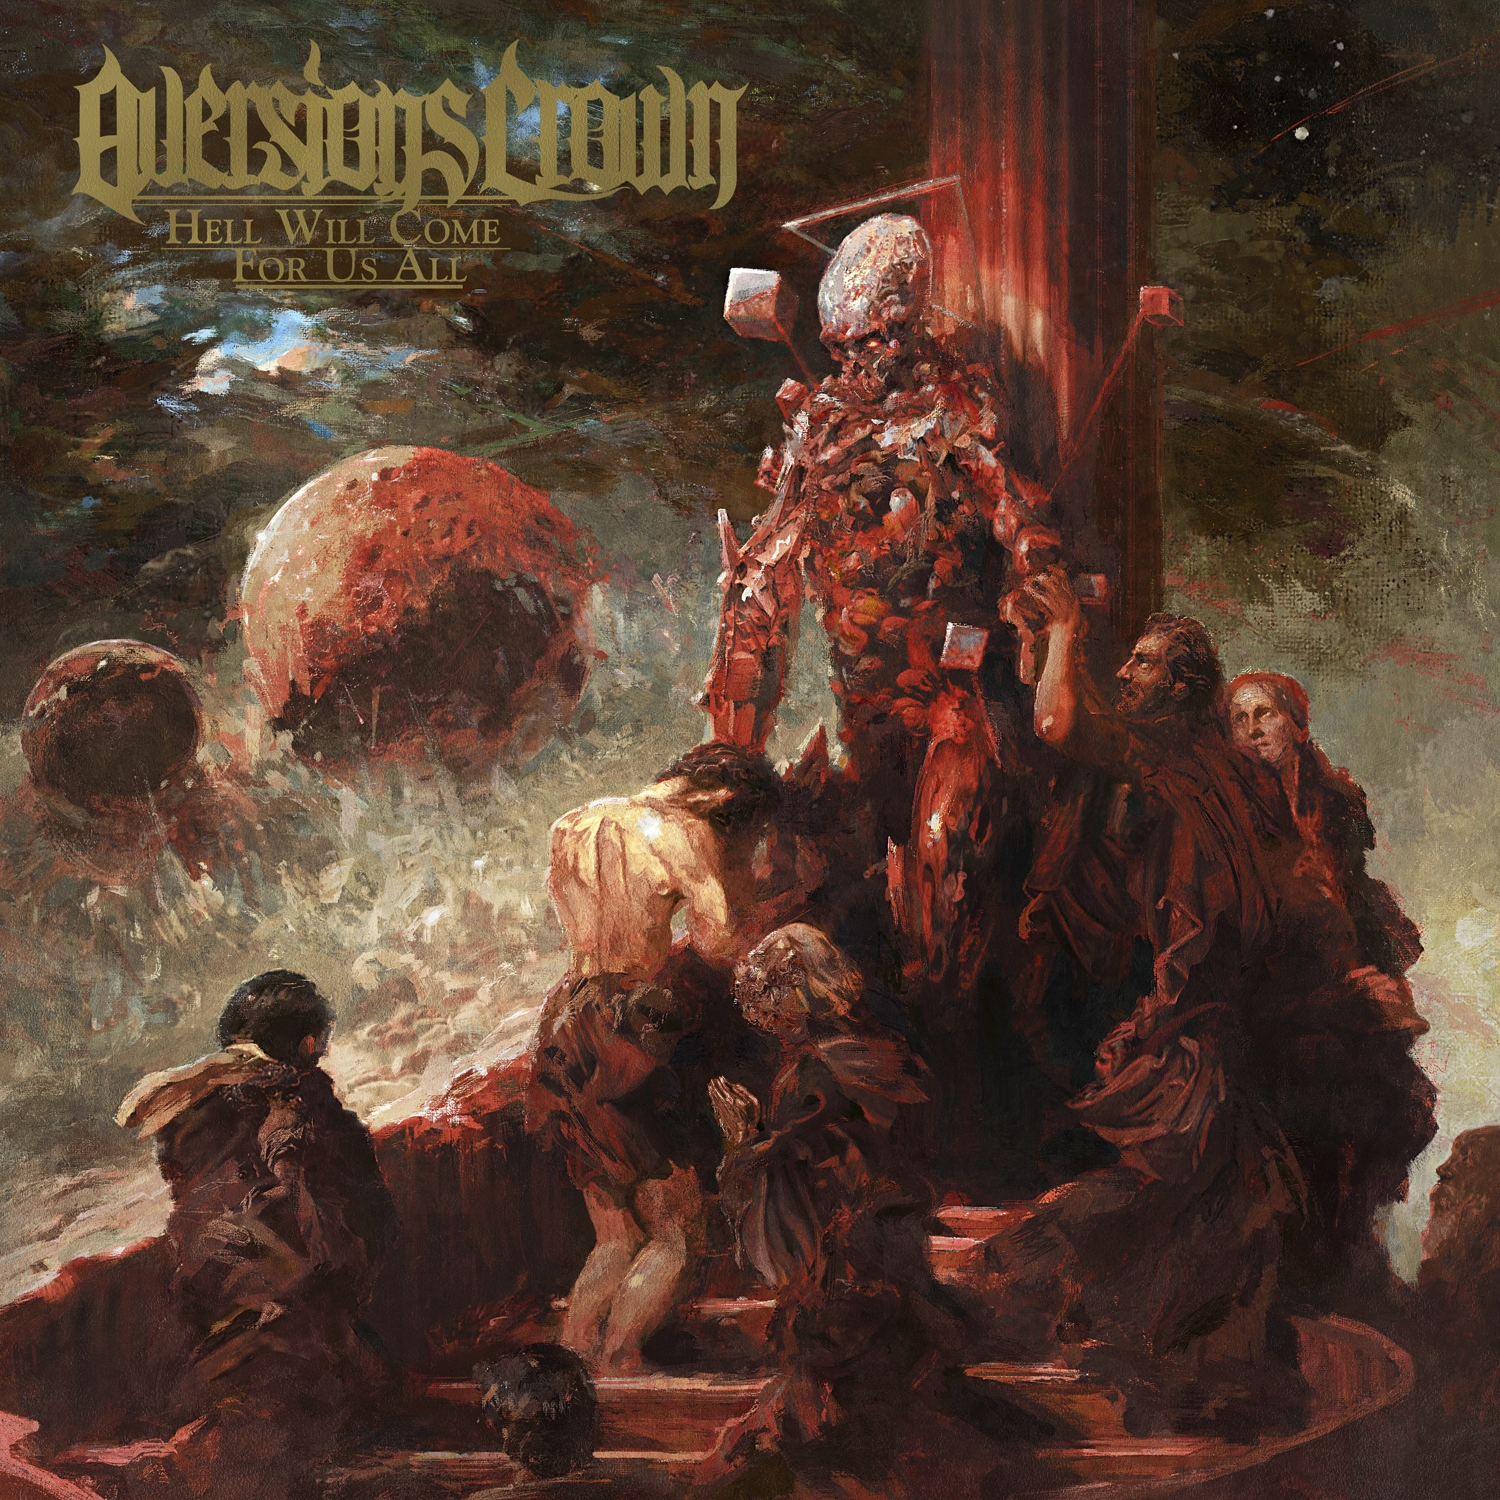 Metal-Review: AVERSIONS CROWN – Hell Will Come For Us All